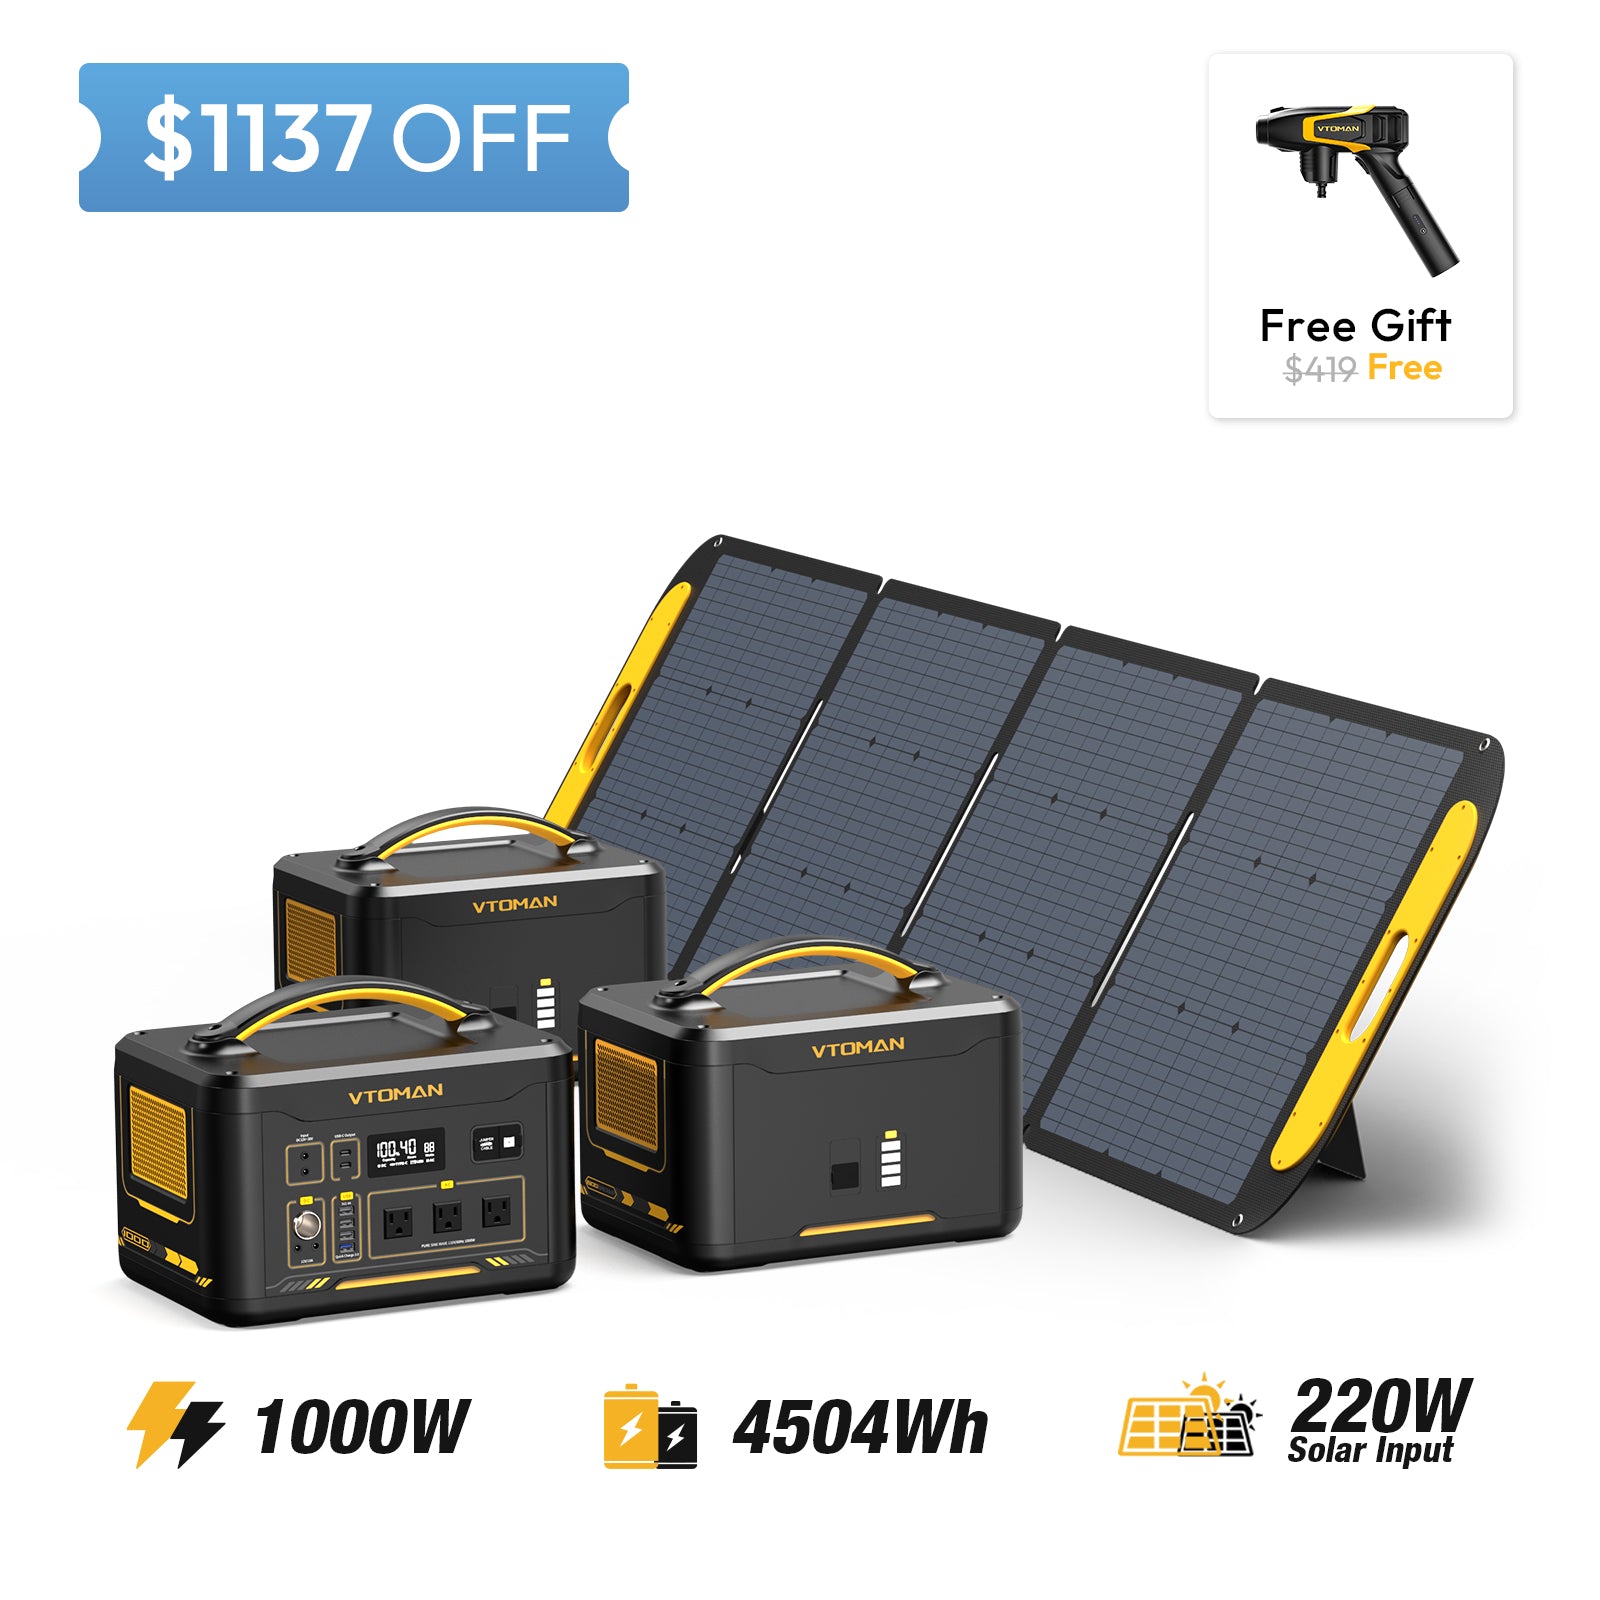 Jump 1000 and 2-1548wh extra battery and 220w solar panel save $1137in summer sale